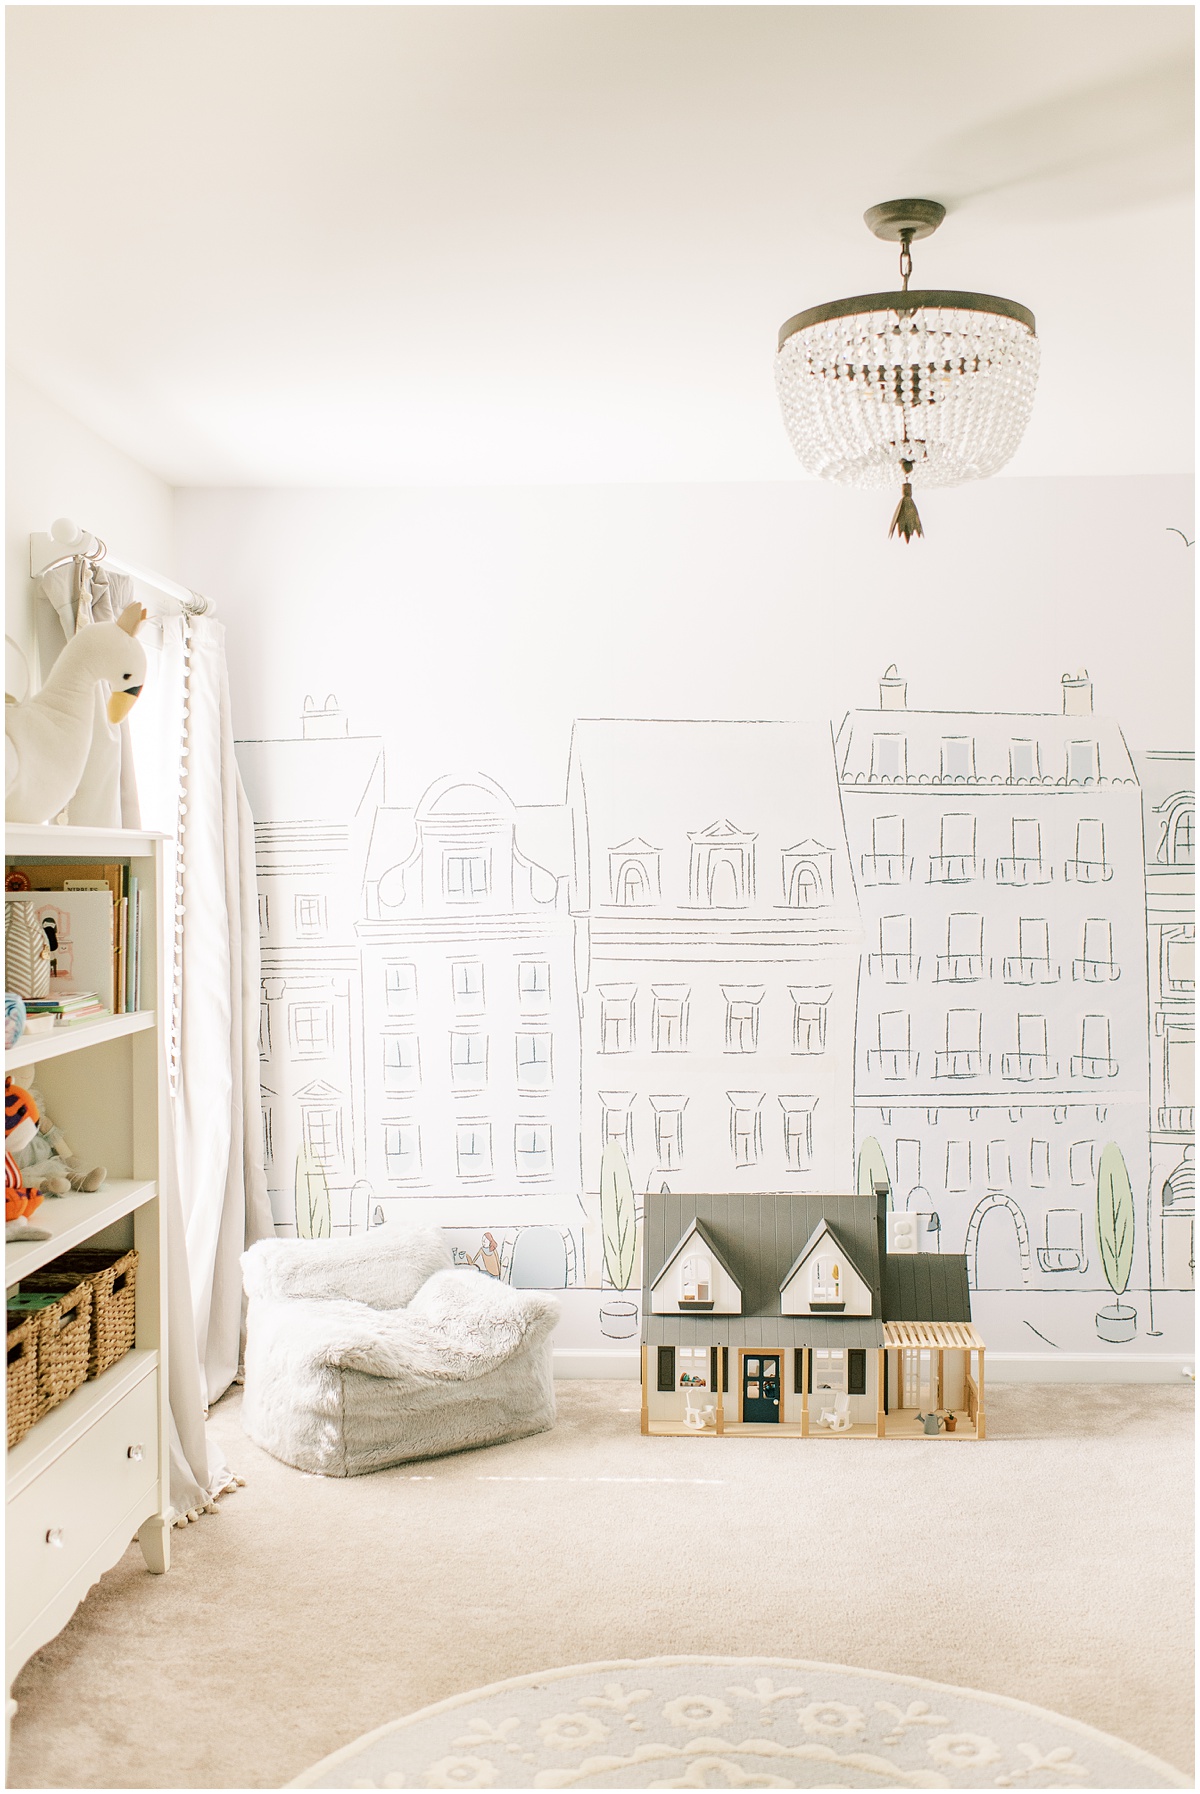 Kids room wall mural with city street